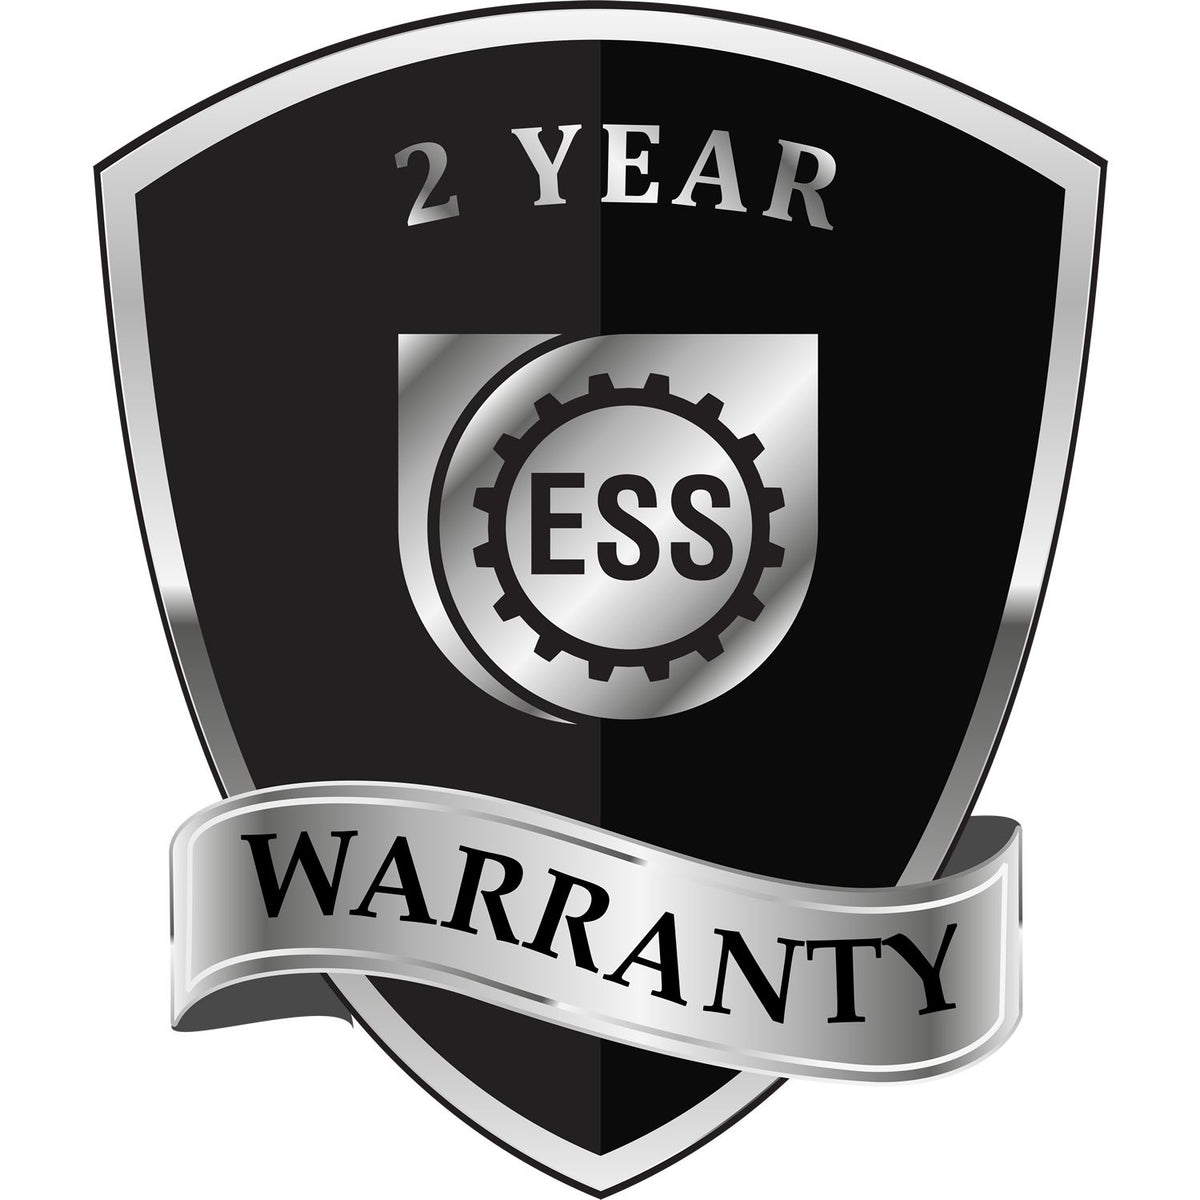 A badge or emblem showing a warranty icon for the Extended Long Reach Arkansas Surveyor Embosser